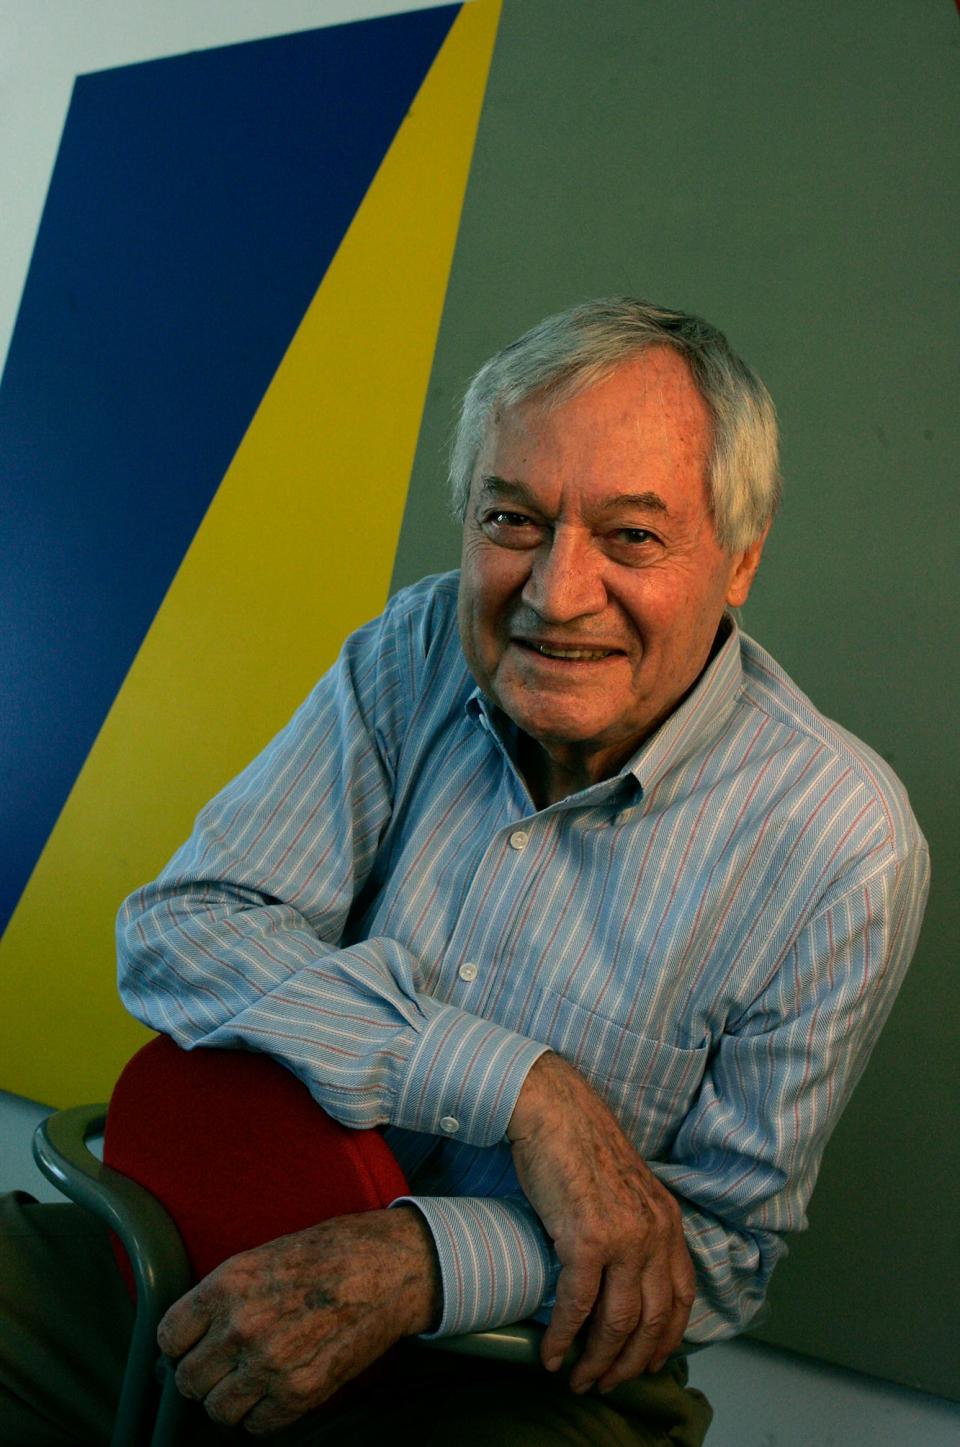 Roger Corman leaning on a red chair